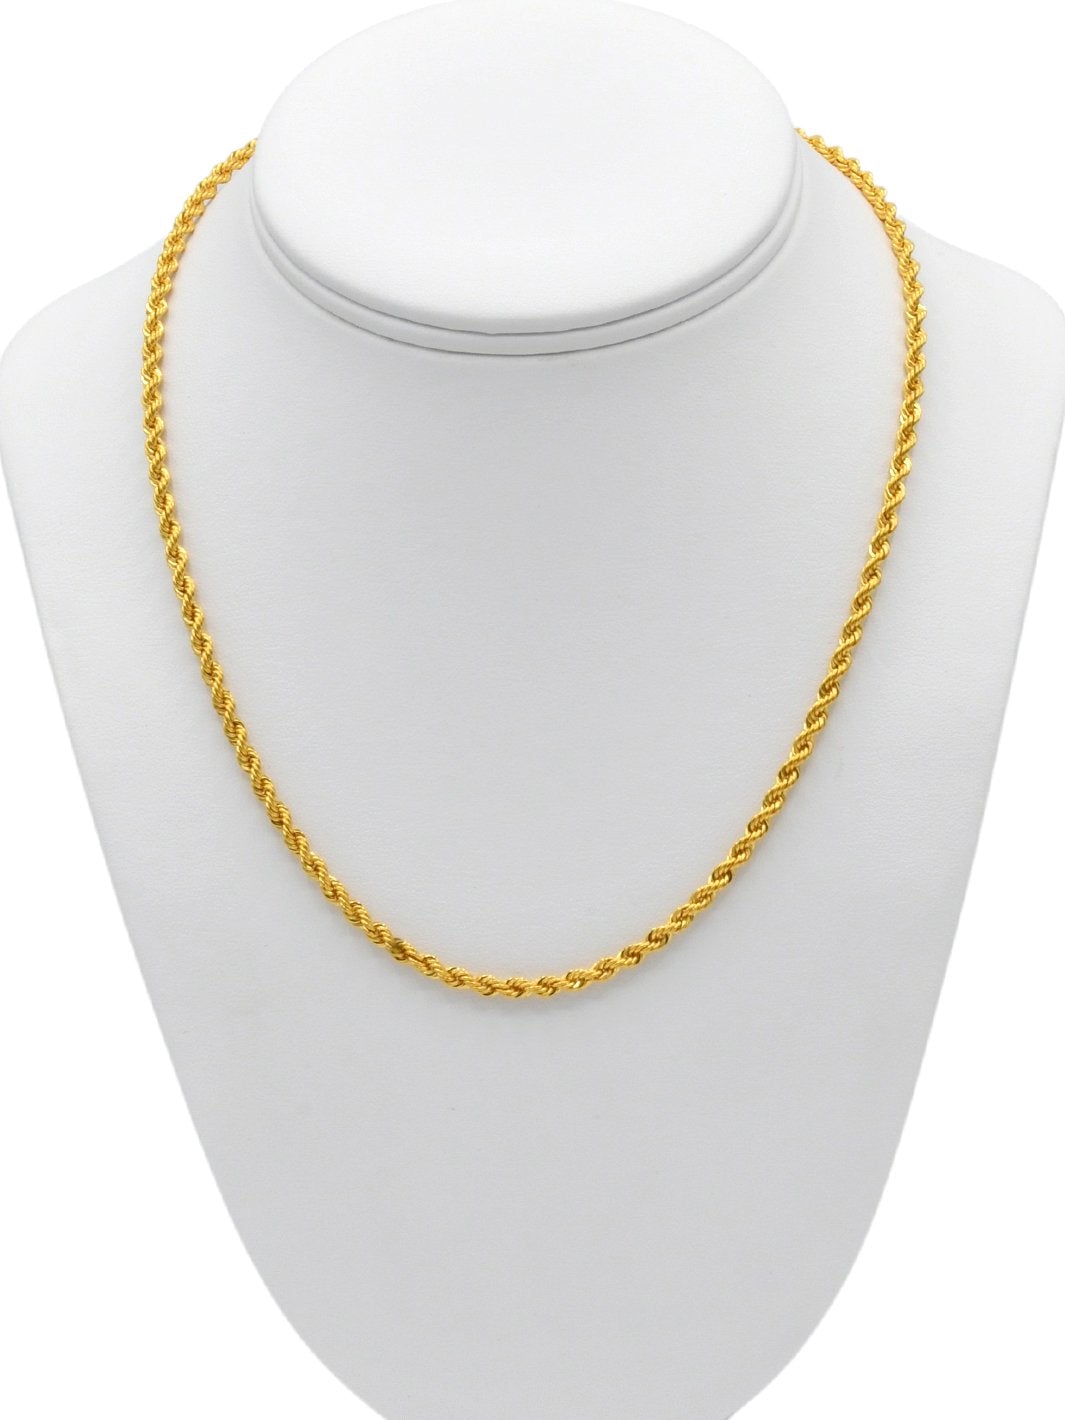 22ct Gold Hollow Rope Chain - 45 CM - Roop Darshan